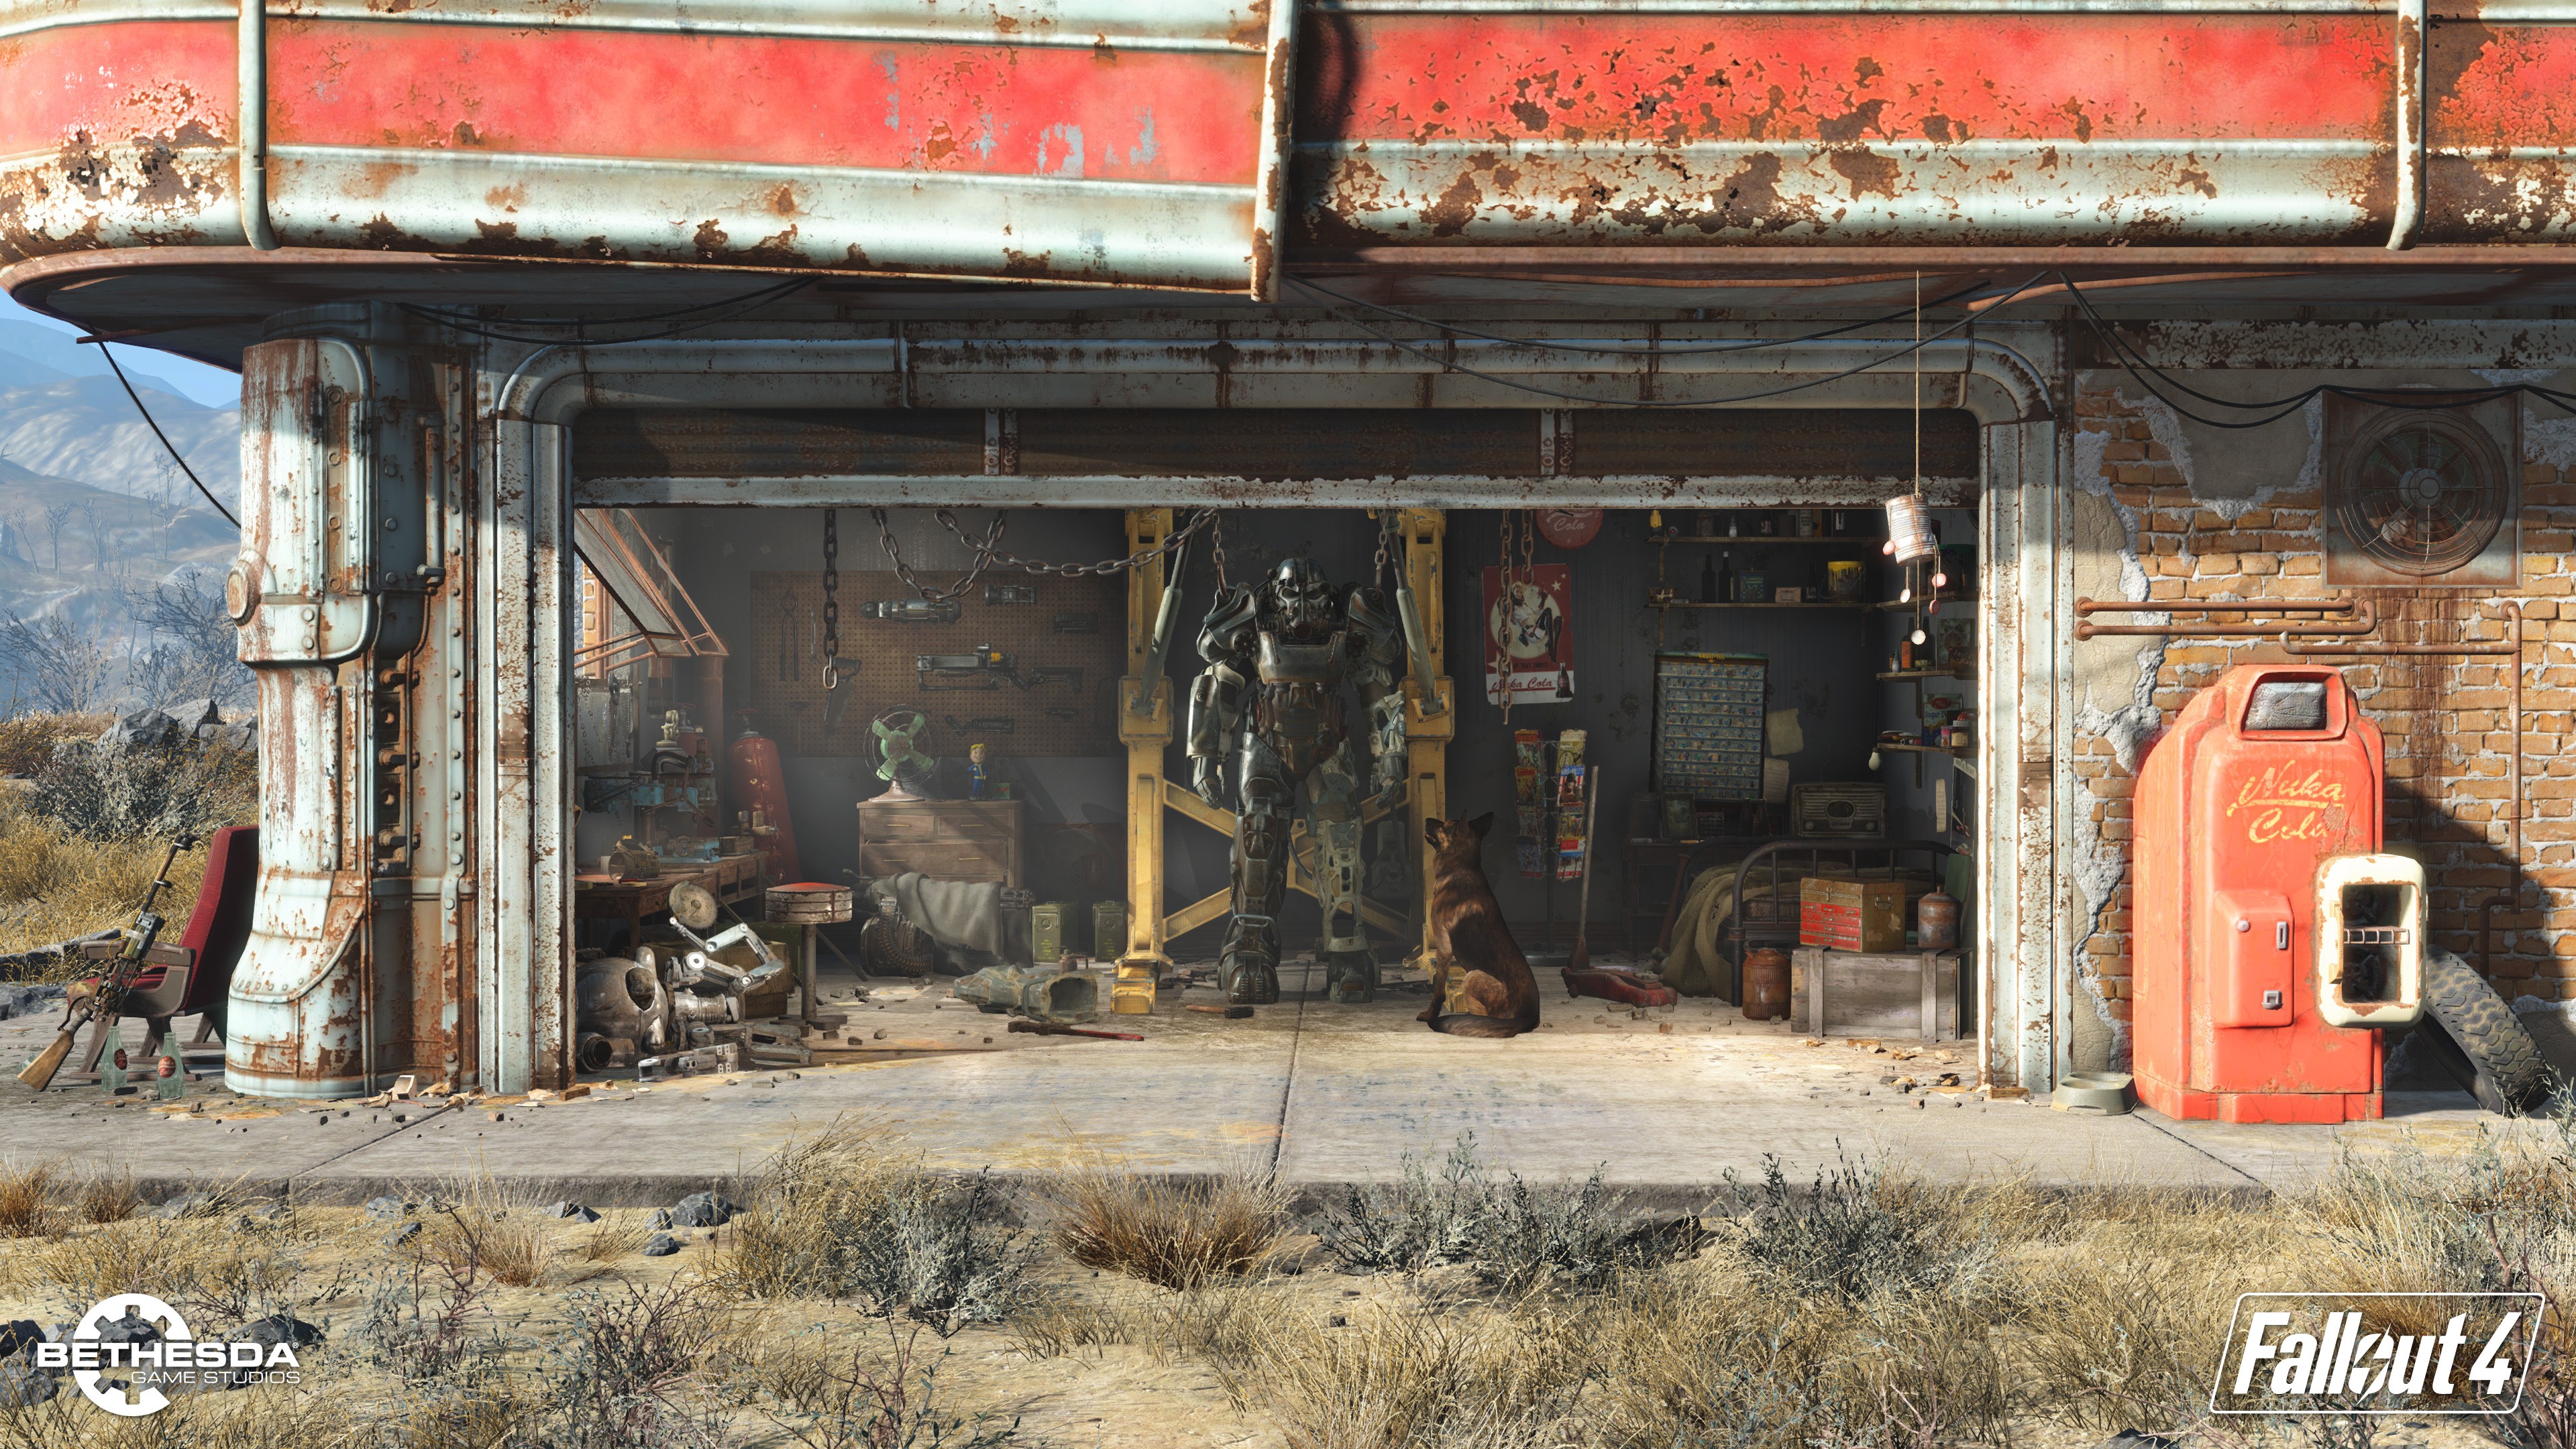 Fallout Video Games Apocalyptic Brotherhood Of Steel 3840x2160